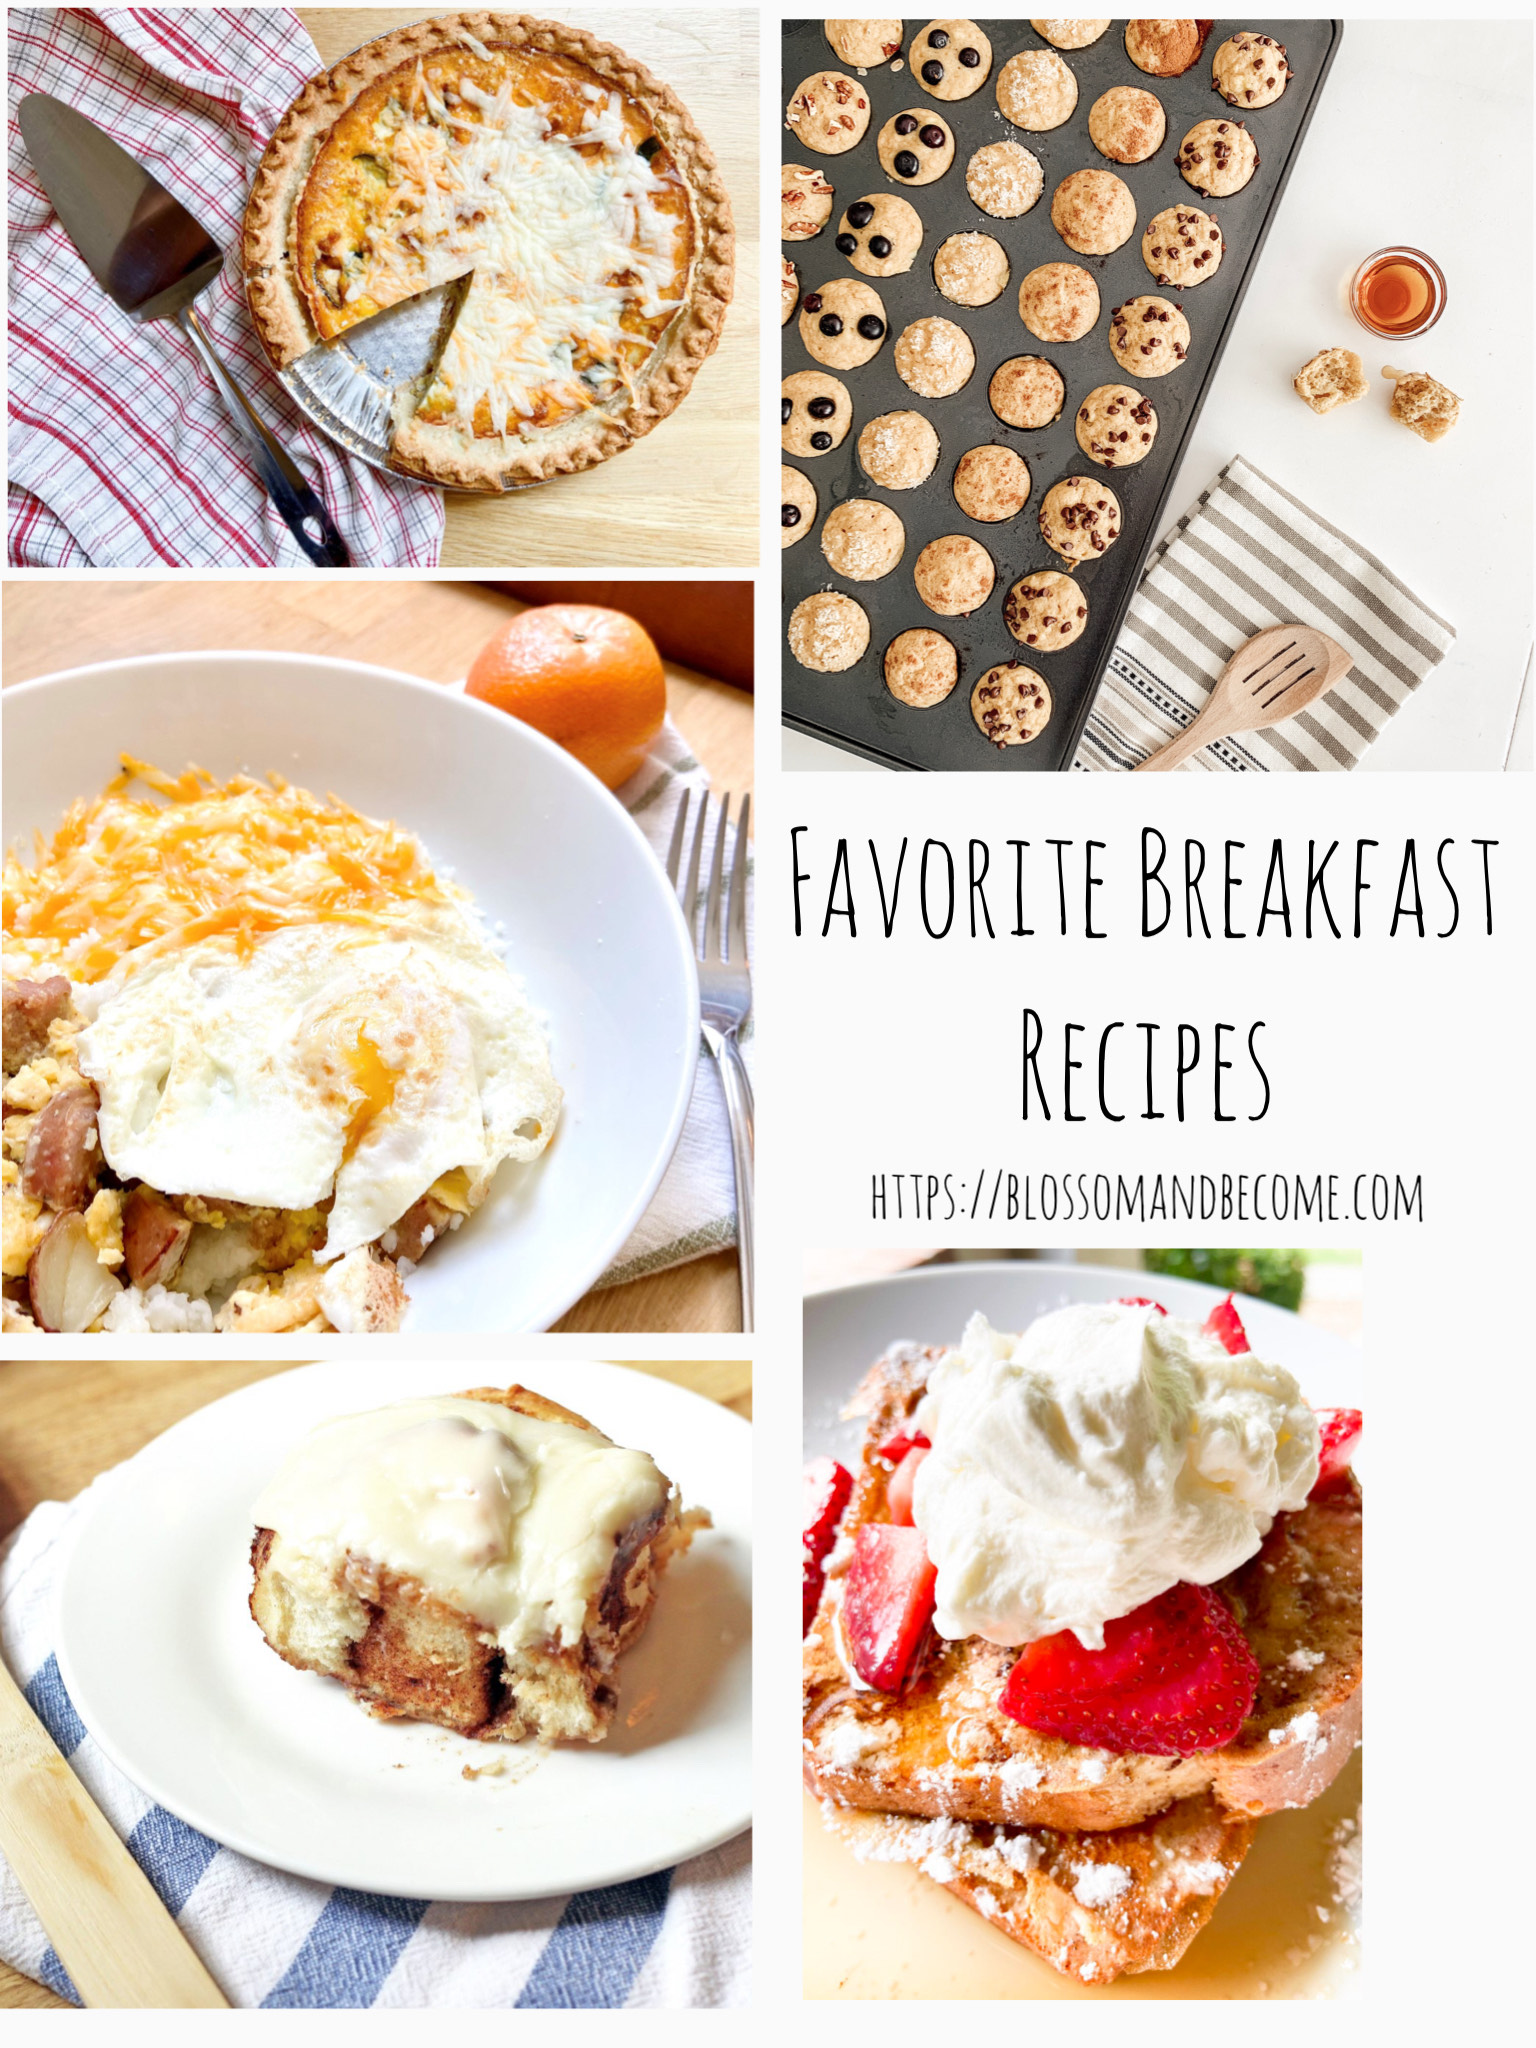 Our Favorite Breakfast Recipes - Blossom & Become